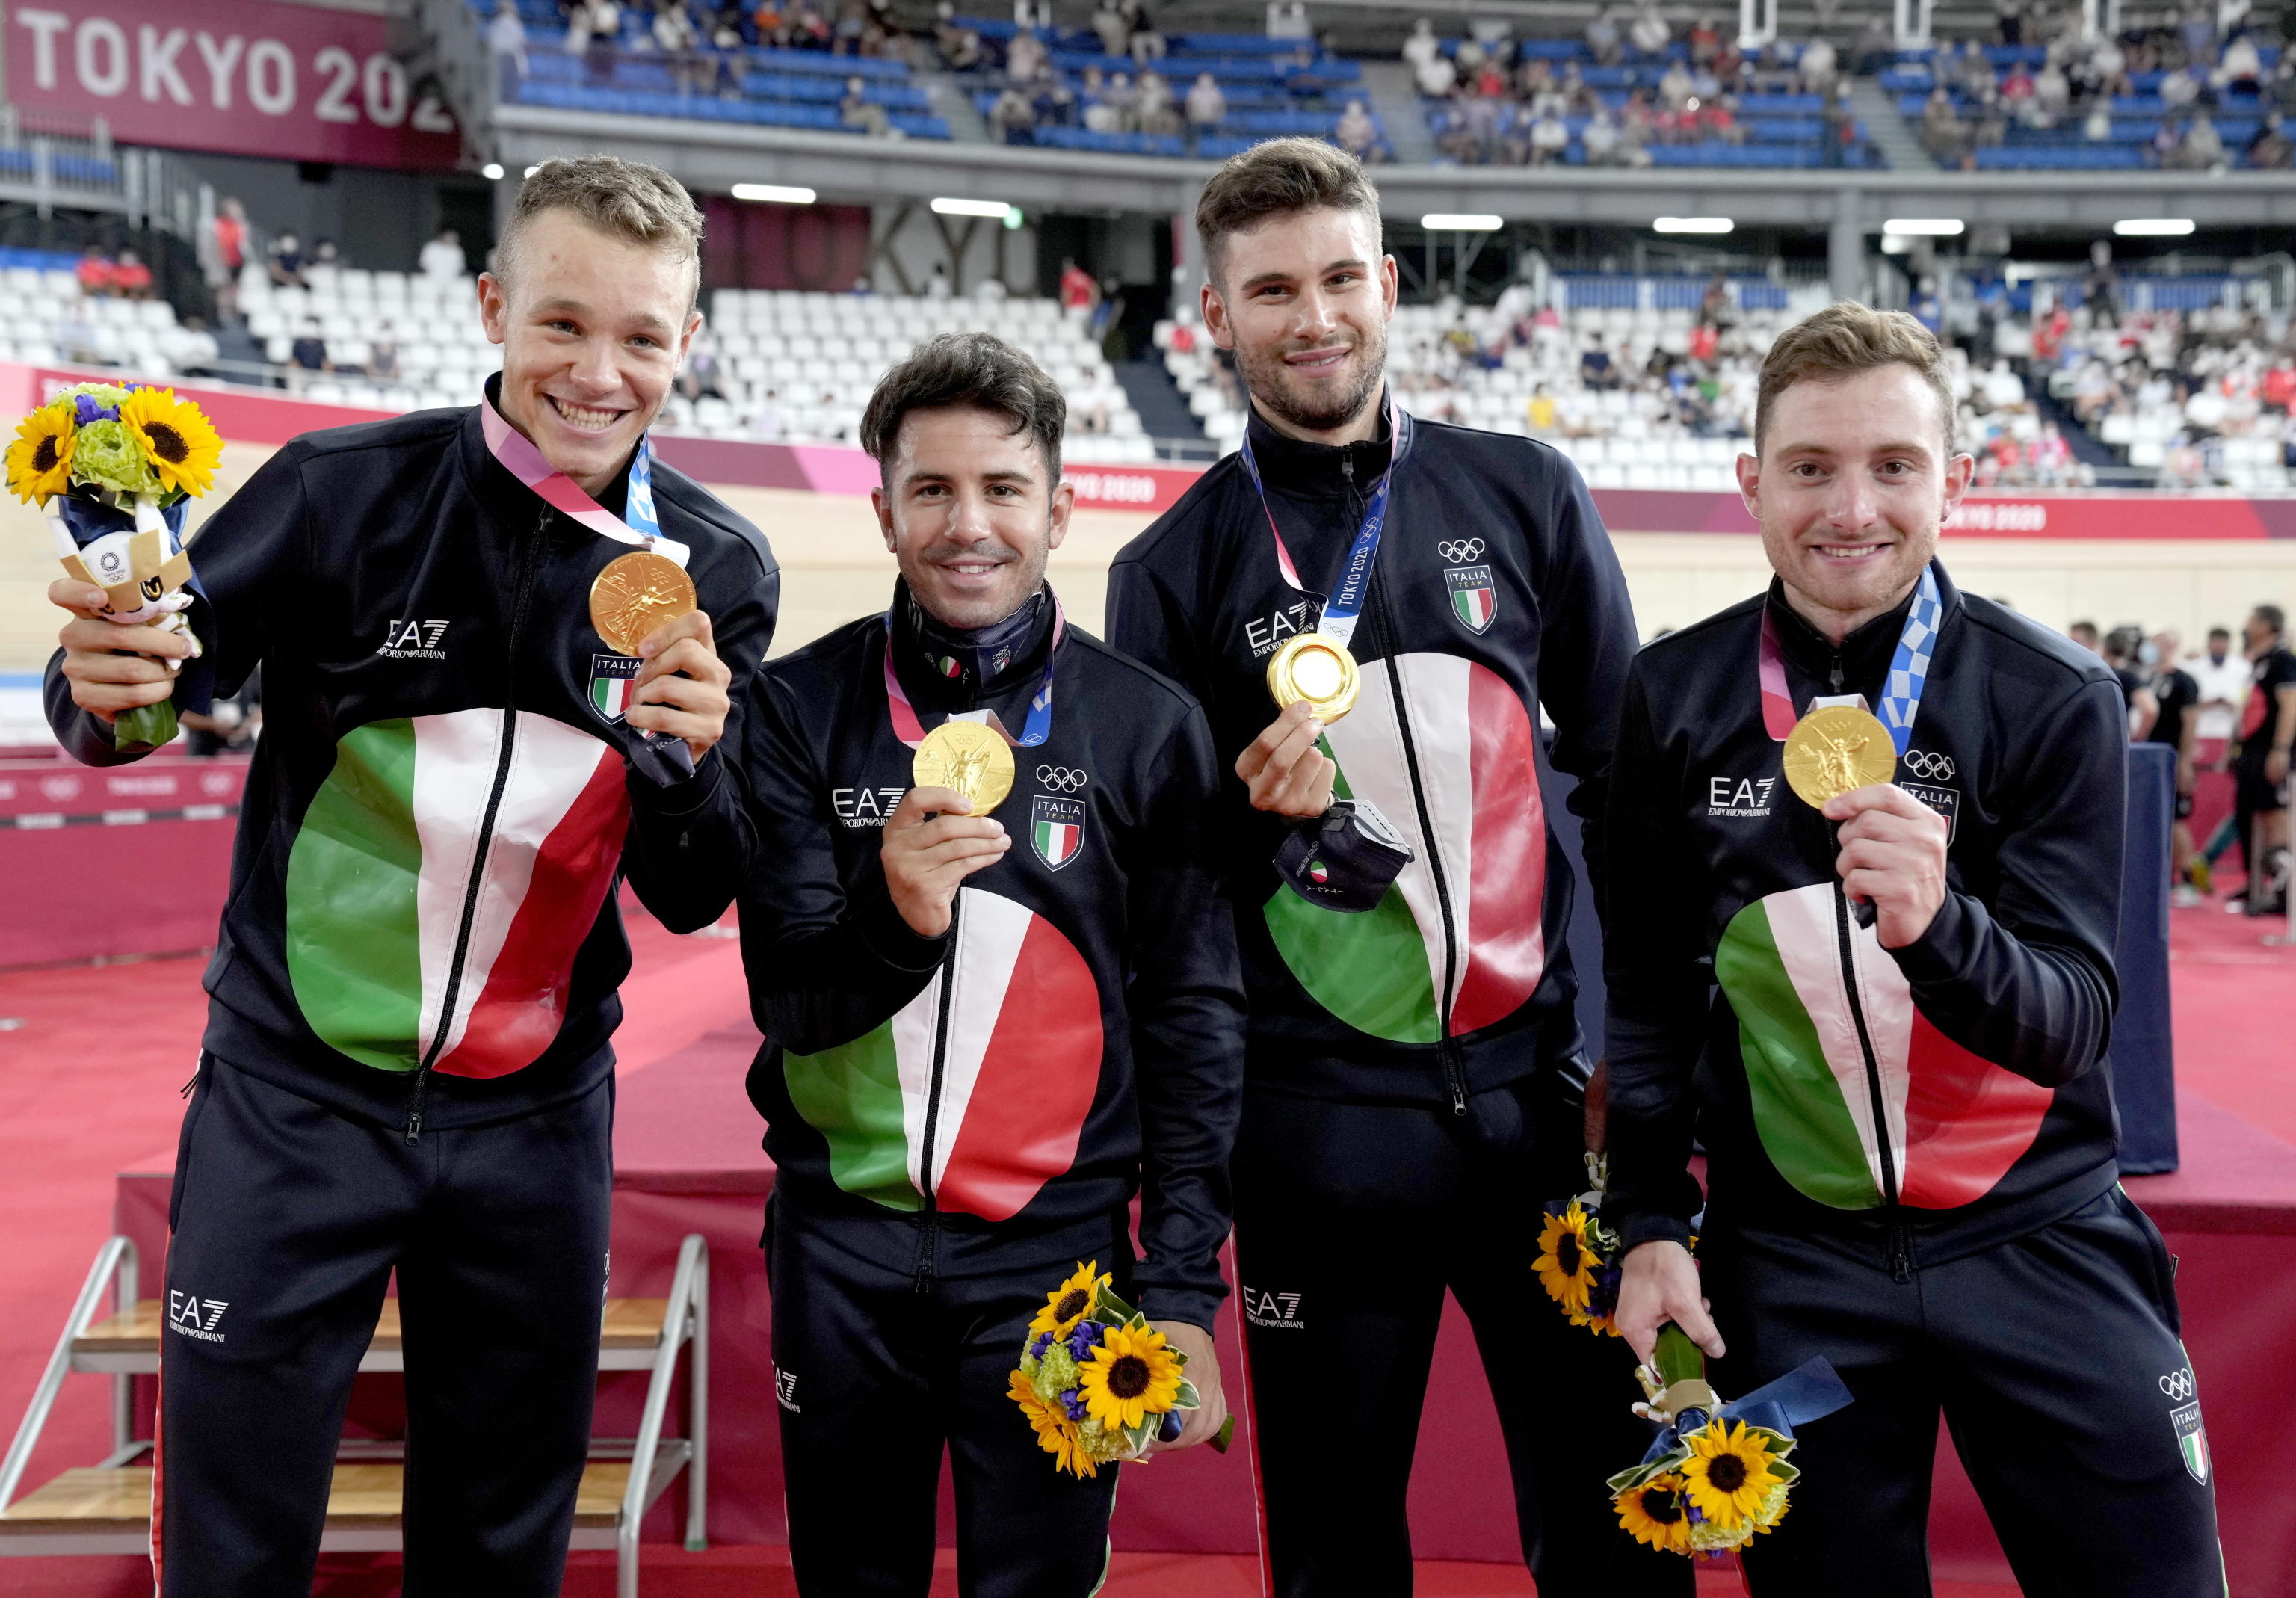 Amazing Italian quartet: gold with the world record. Italy's 30th medal at the Games